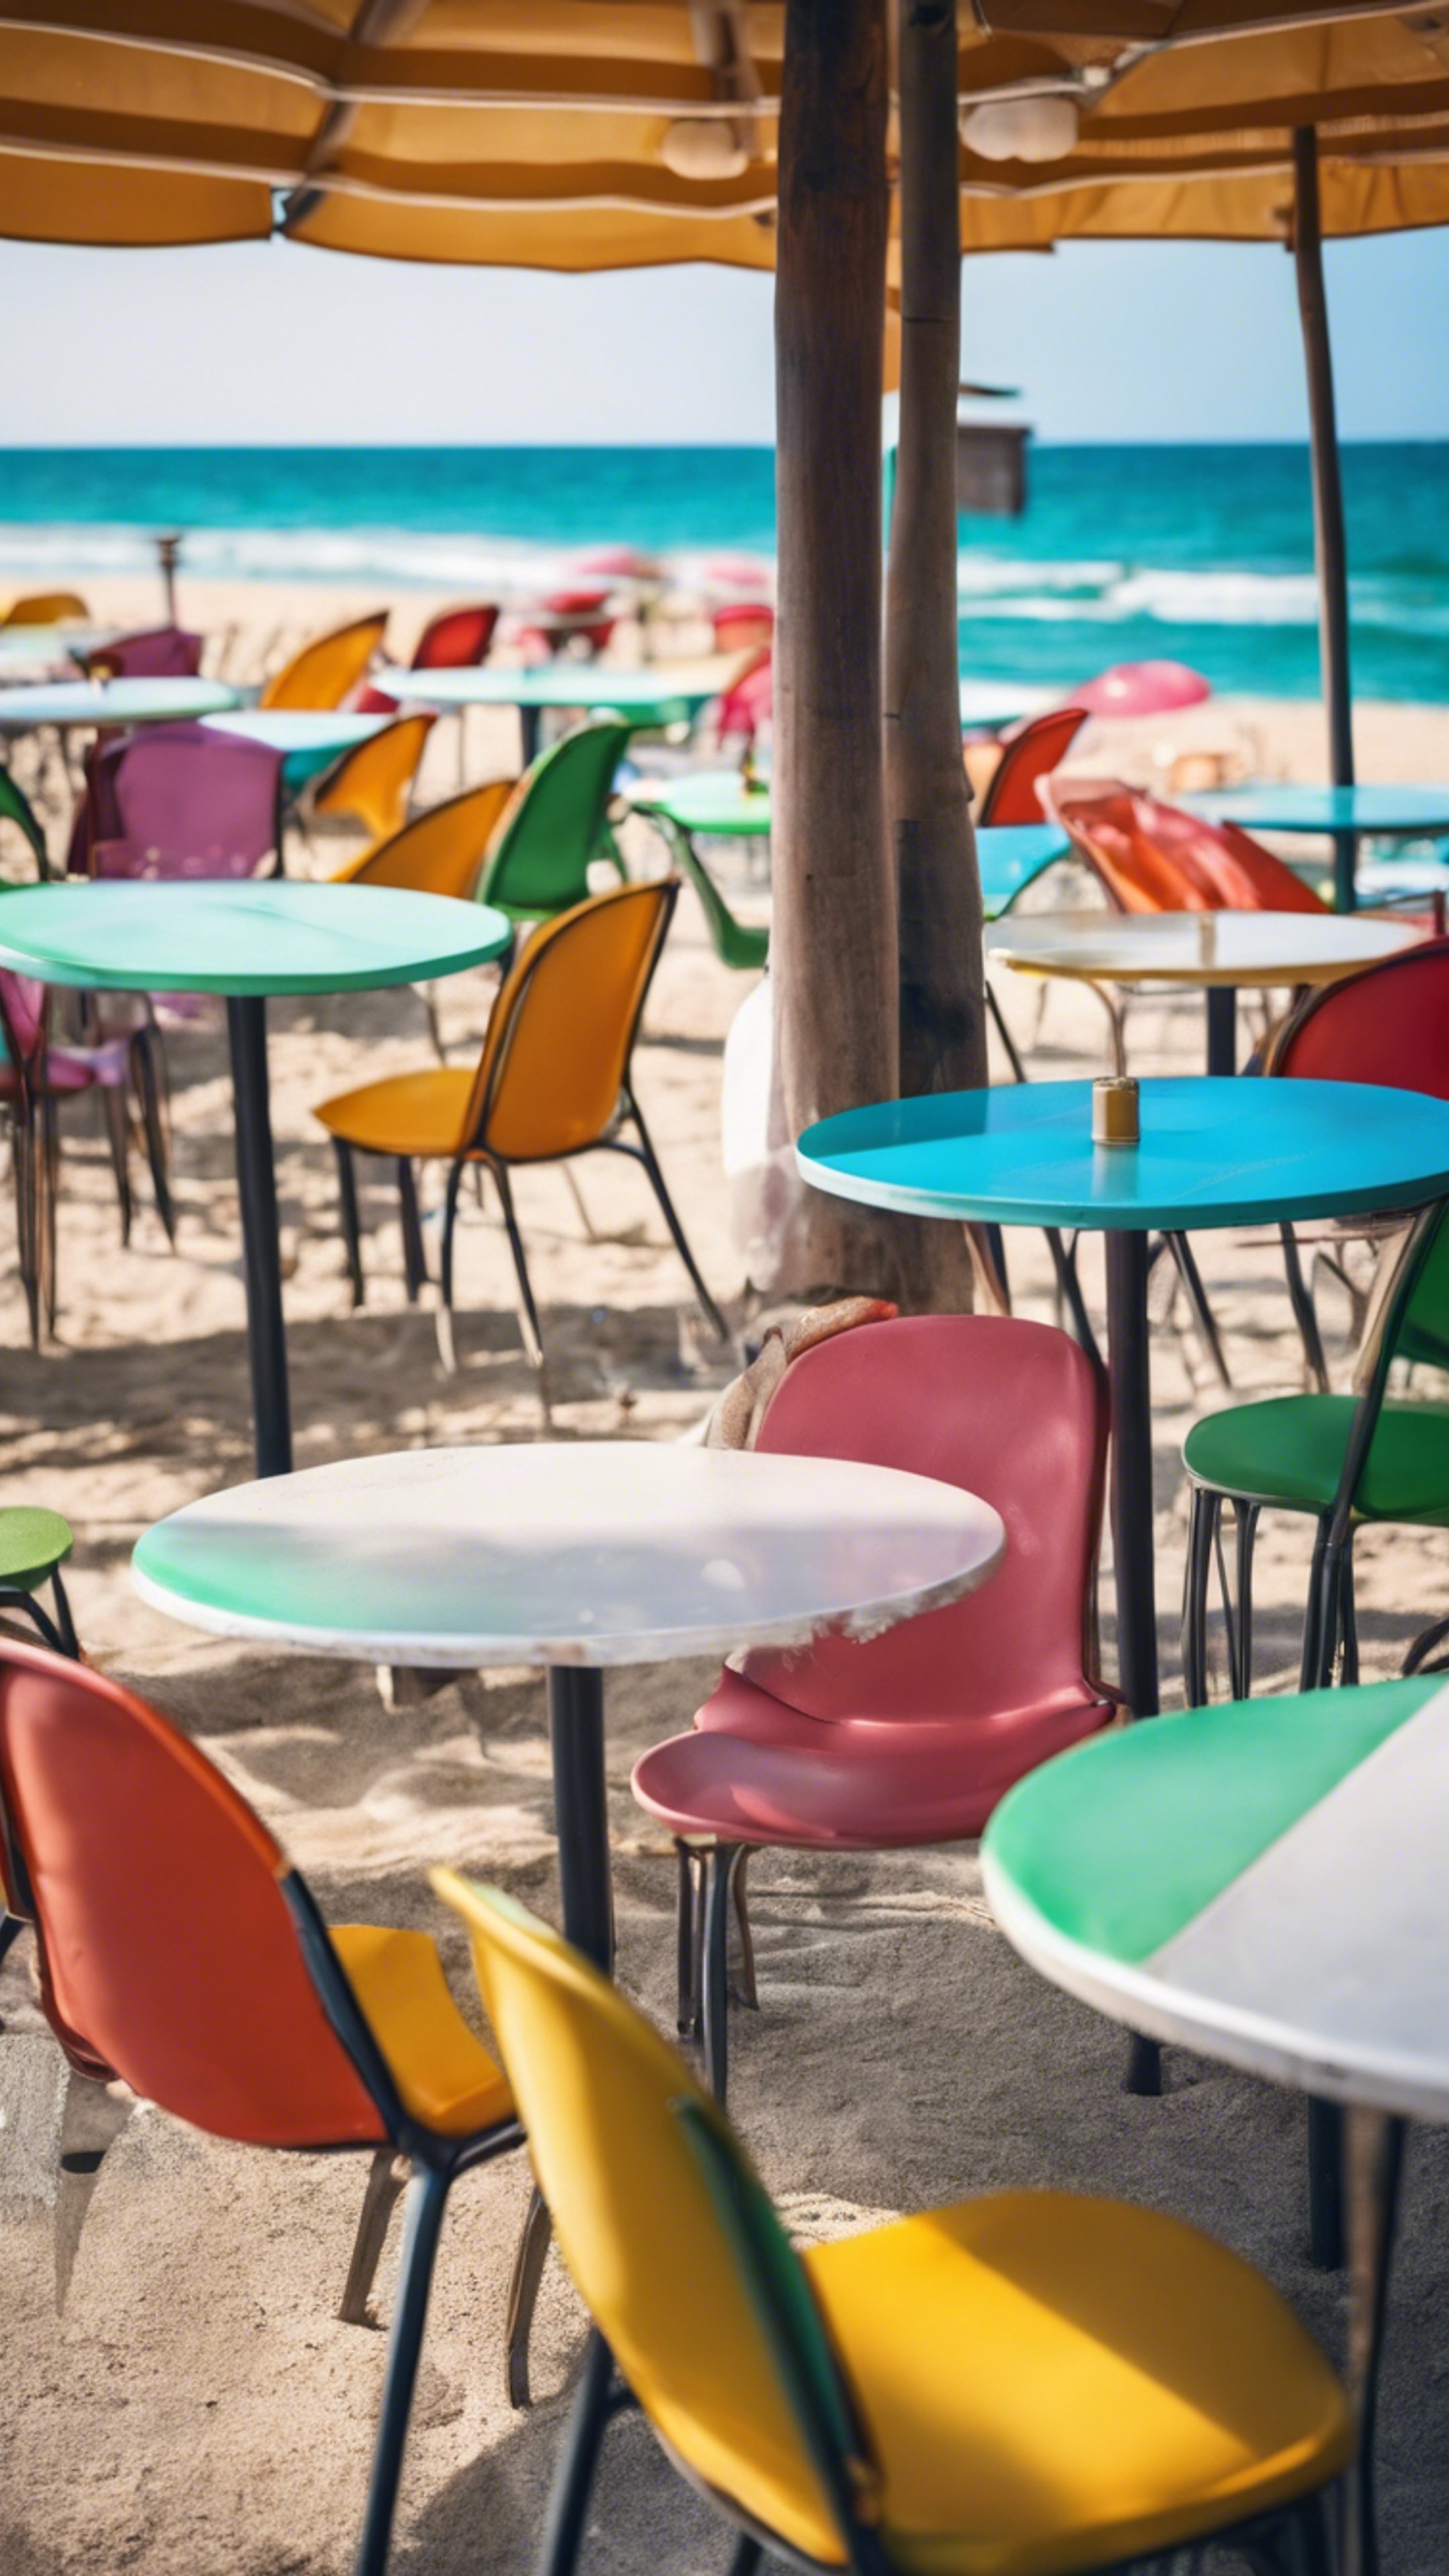 A beach side cafe with colorful chairs, umbrellas, and a panoramic view of the ocean. Tapeta[e8a344cbd52d49a3867e]